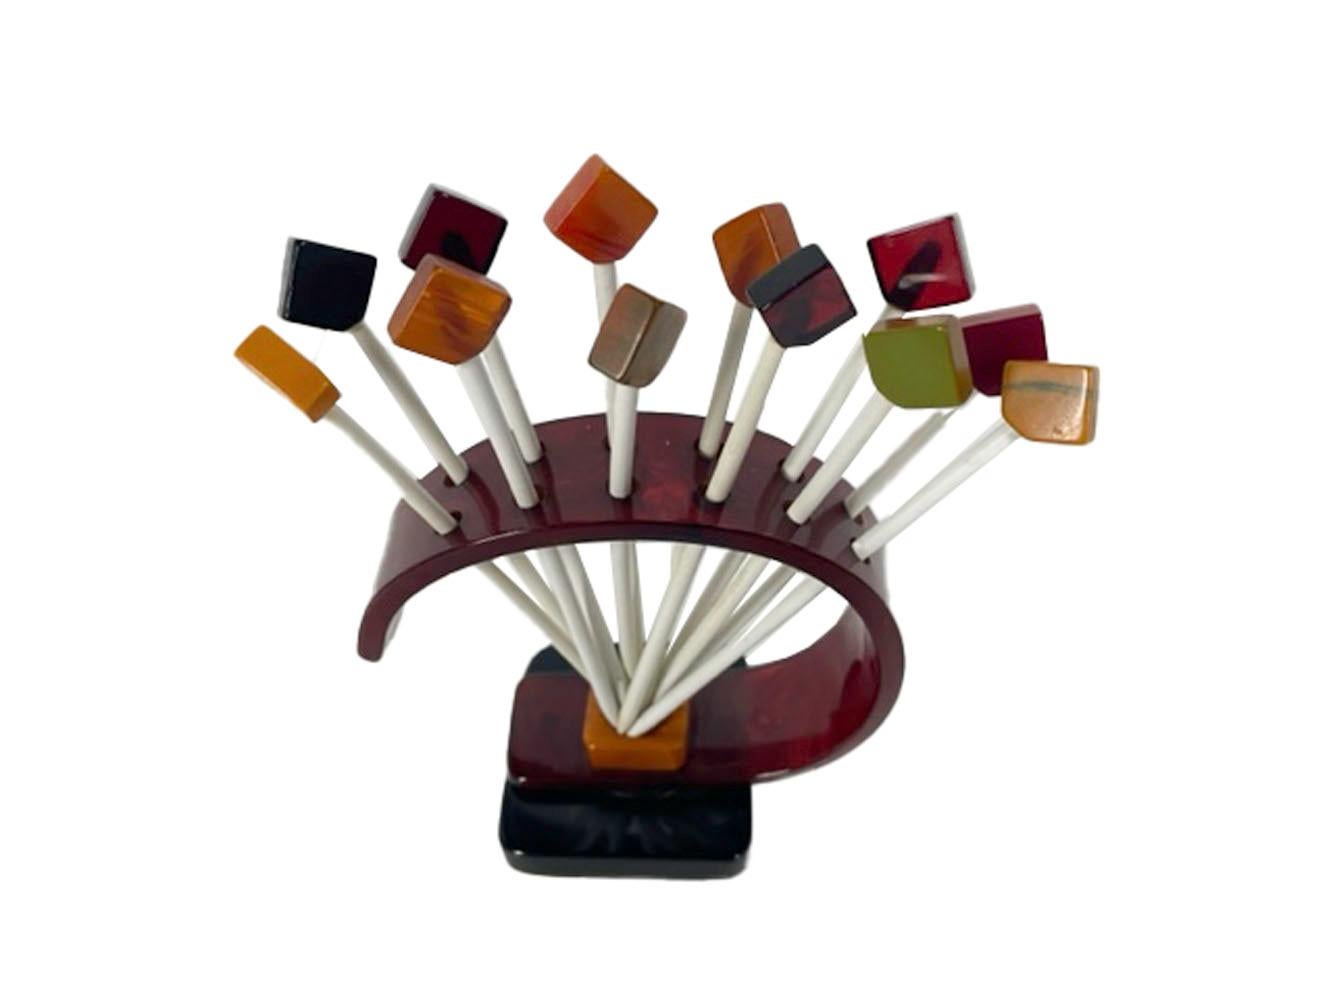 Set of 12 Art Deco cocktail picks in Bakelite stand. Picks with square tiles of various colors of Bakelite set diagonally on white wood picks stand in an arched support of tortoise, butterscotch and black Bakelite.